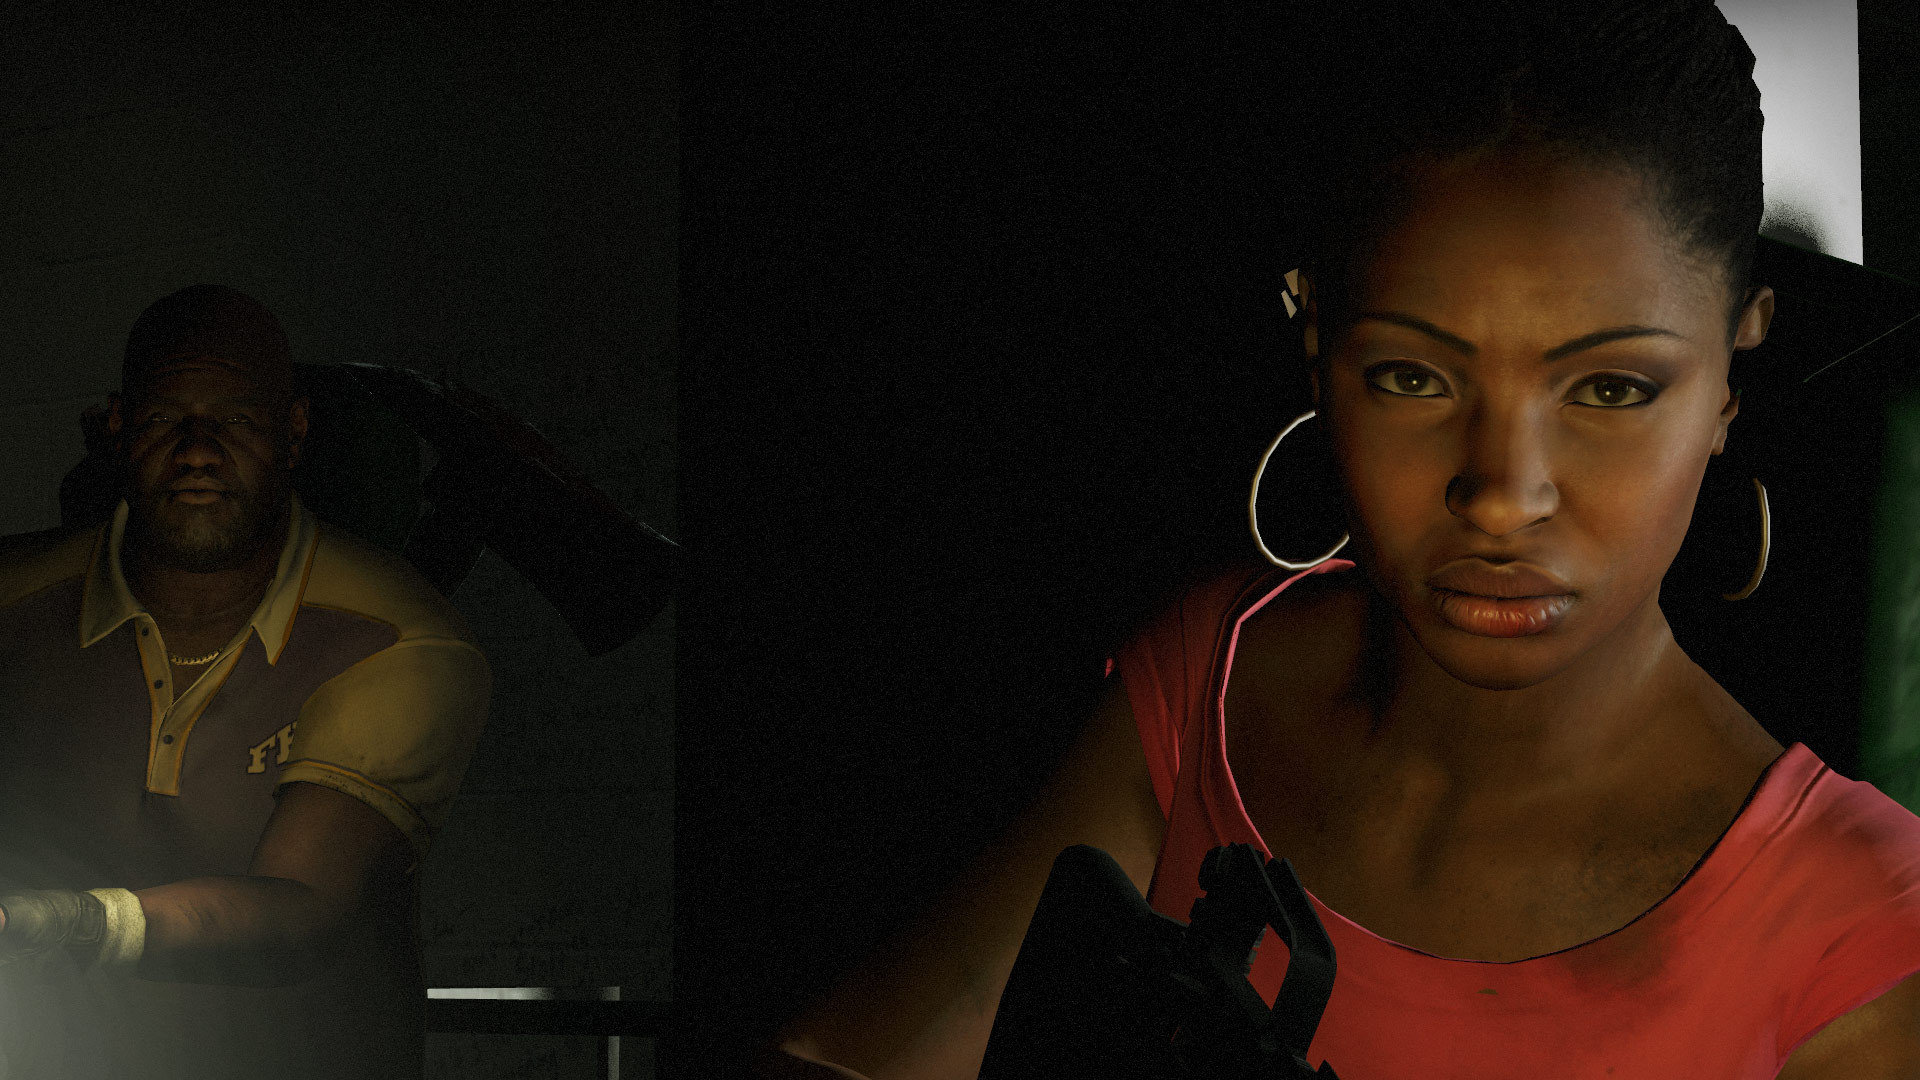 Awesome Left 4 Dead 2 (L4D2) free background ID:253456 for hd 1920x1080 desktop